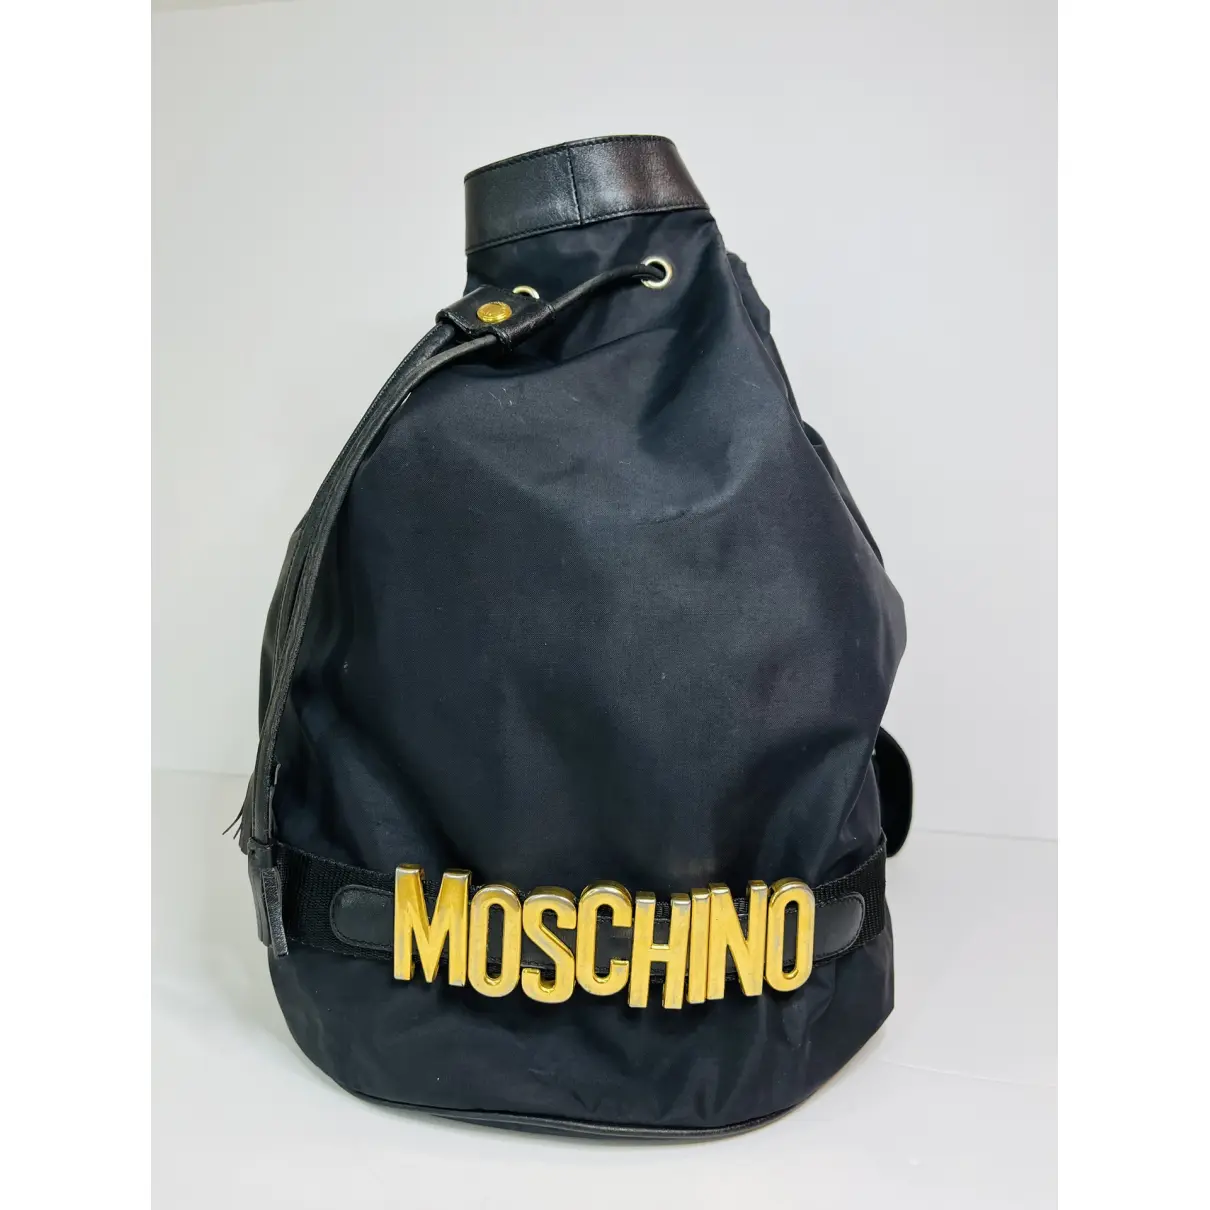 Buy Moschino Backpack online - Vintage